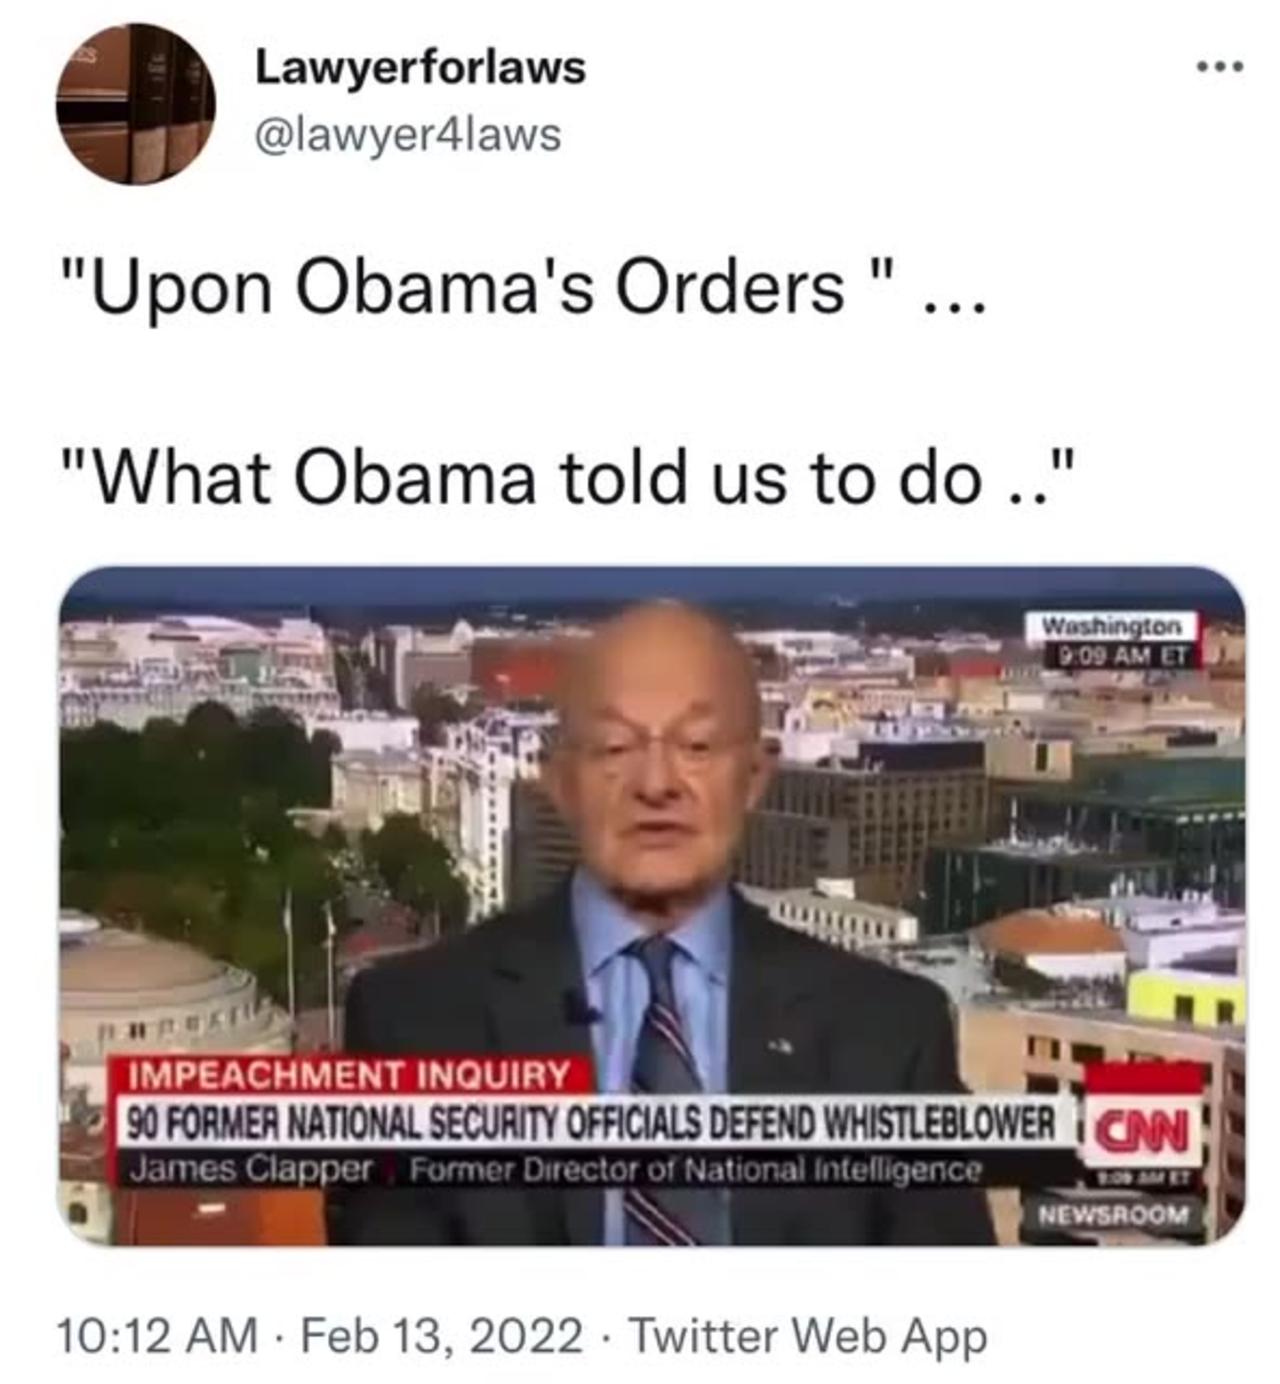 James Clapper just did what Obama told him to do regarding the Russian Collusion Lie